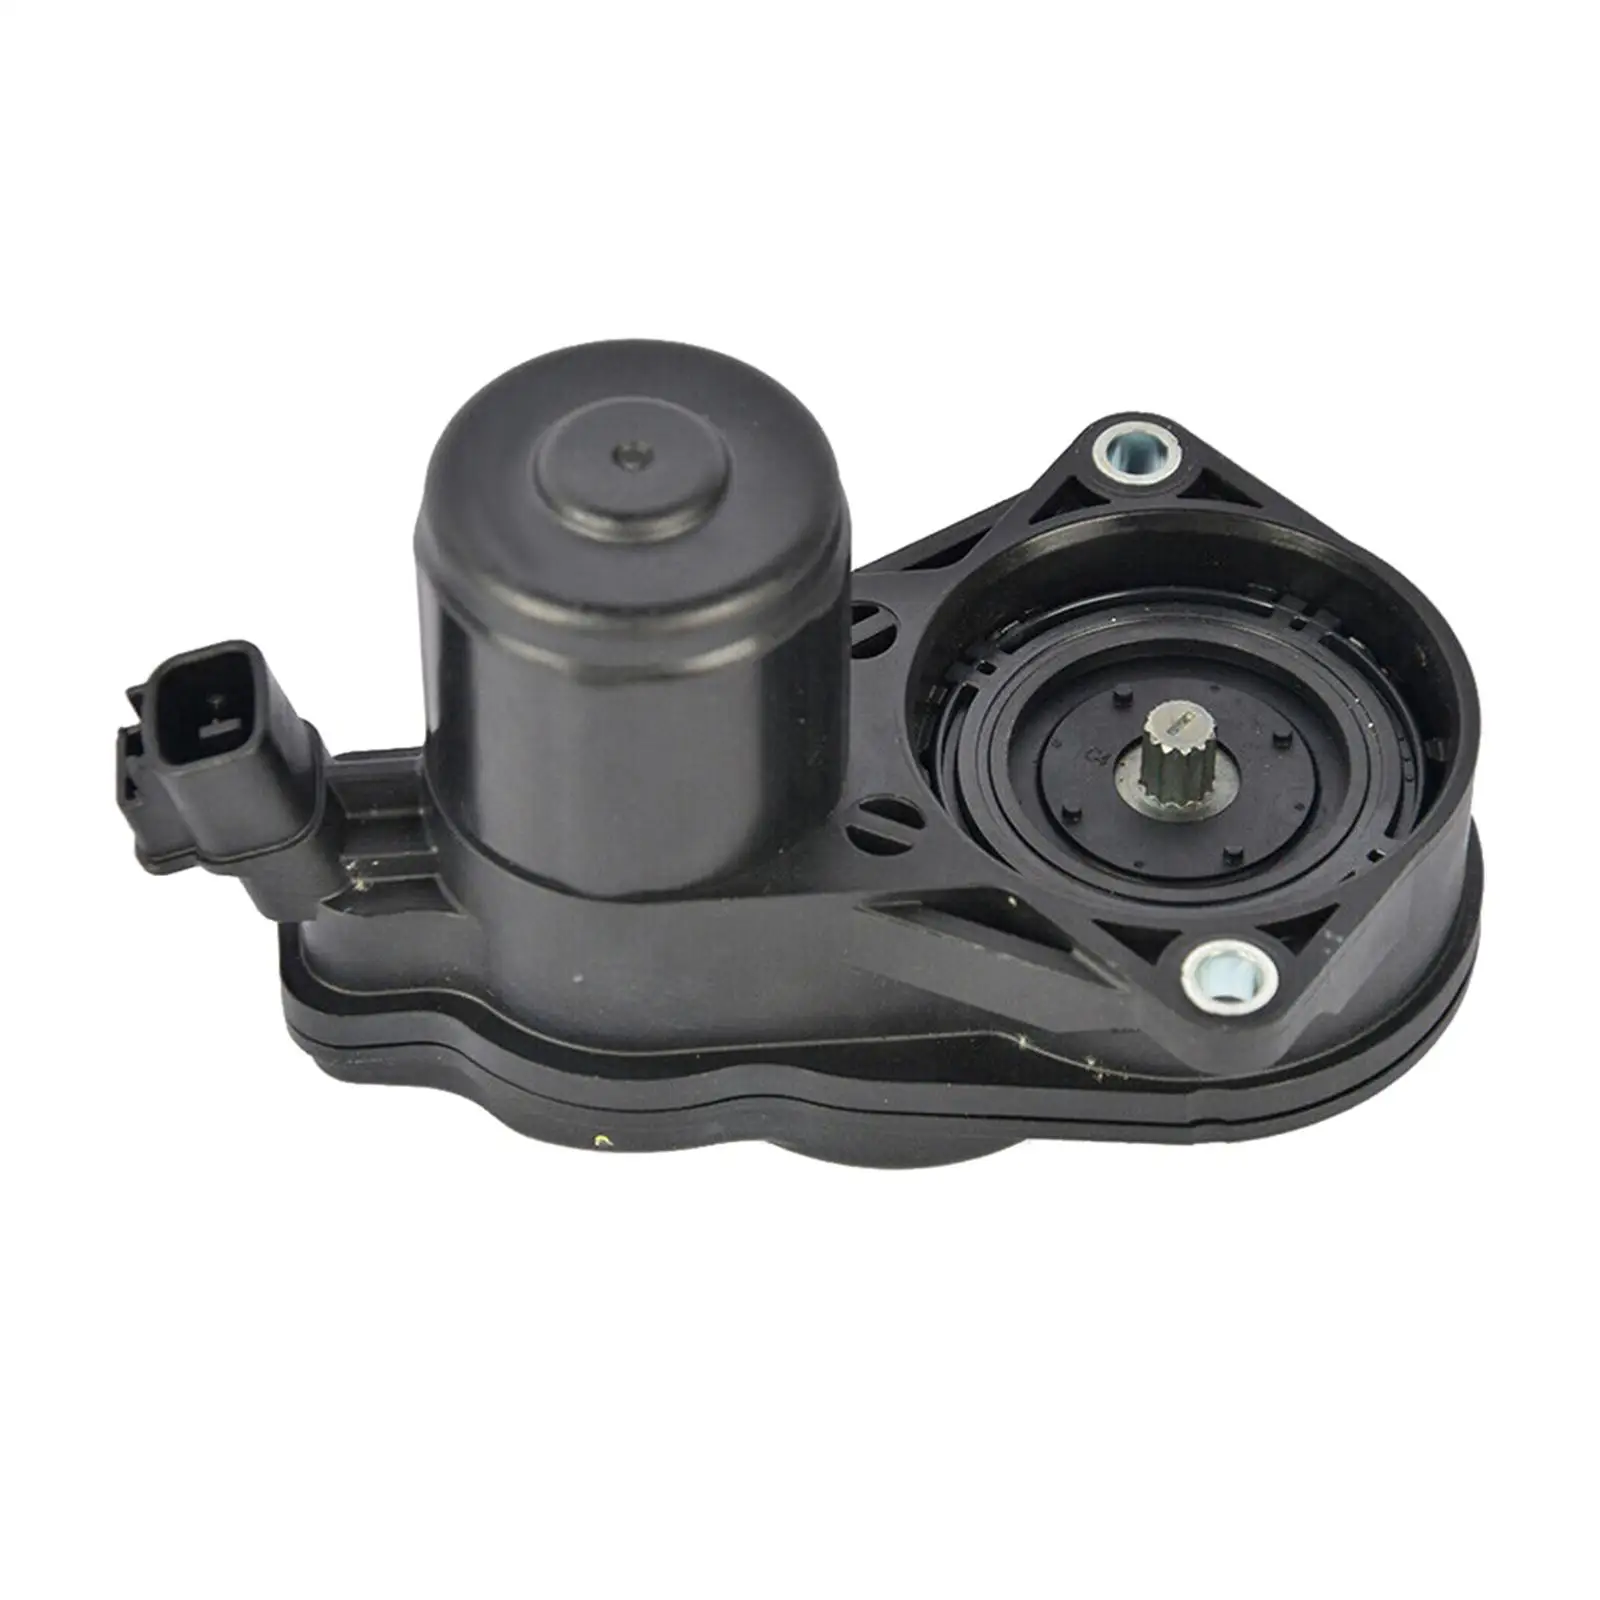 Parking Brake Actuator replacement for toyota Avalon Corolla Hatchback